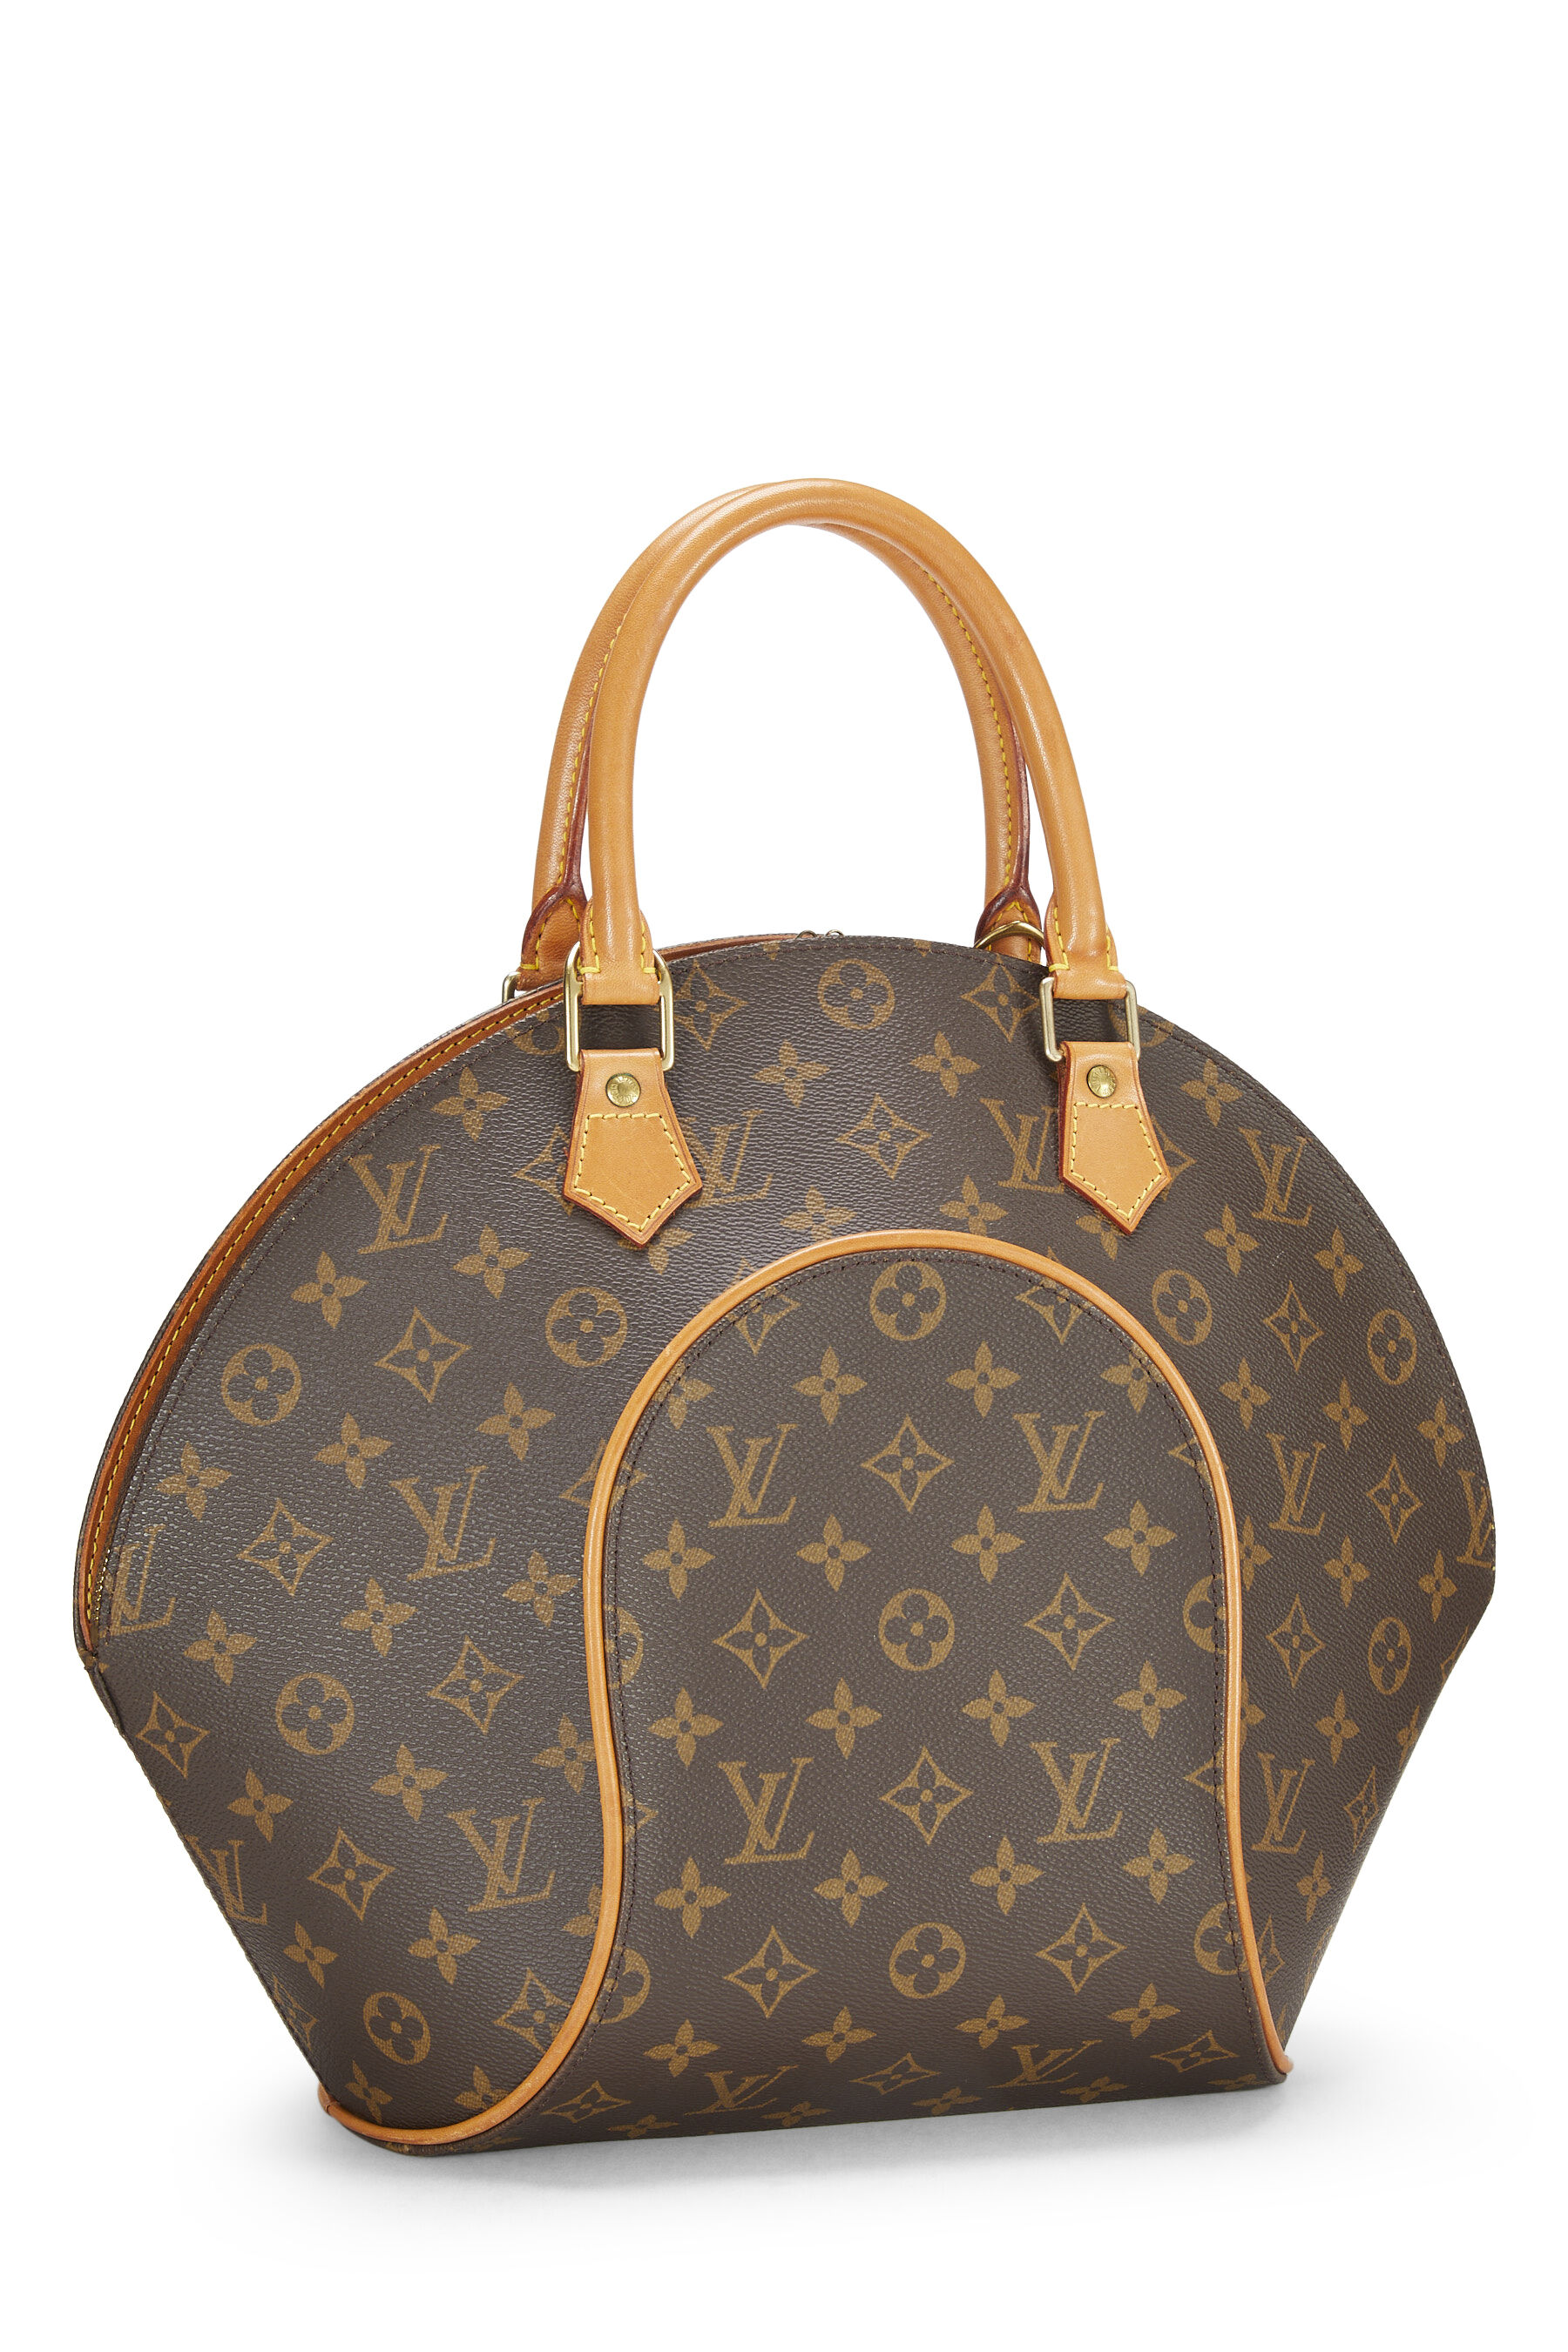 🌟LOUIS VUITTON MONOGRAM SPEEDY ECLIPSE 28🌟 1999 LIMITED EDITION FROM F/W  2009/2010 Monogram canvas with sequin embellished monogram overlay print, By Stark Style